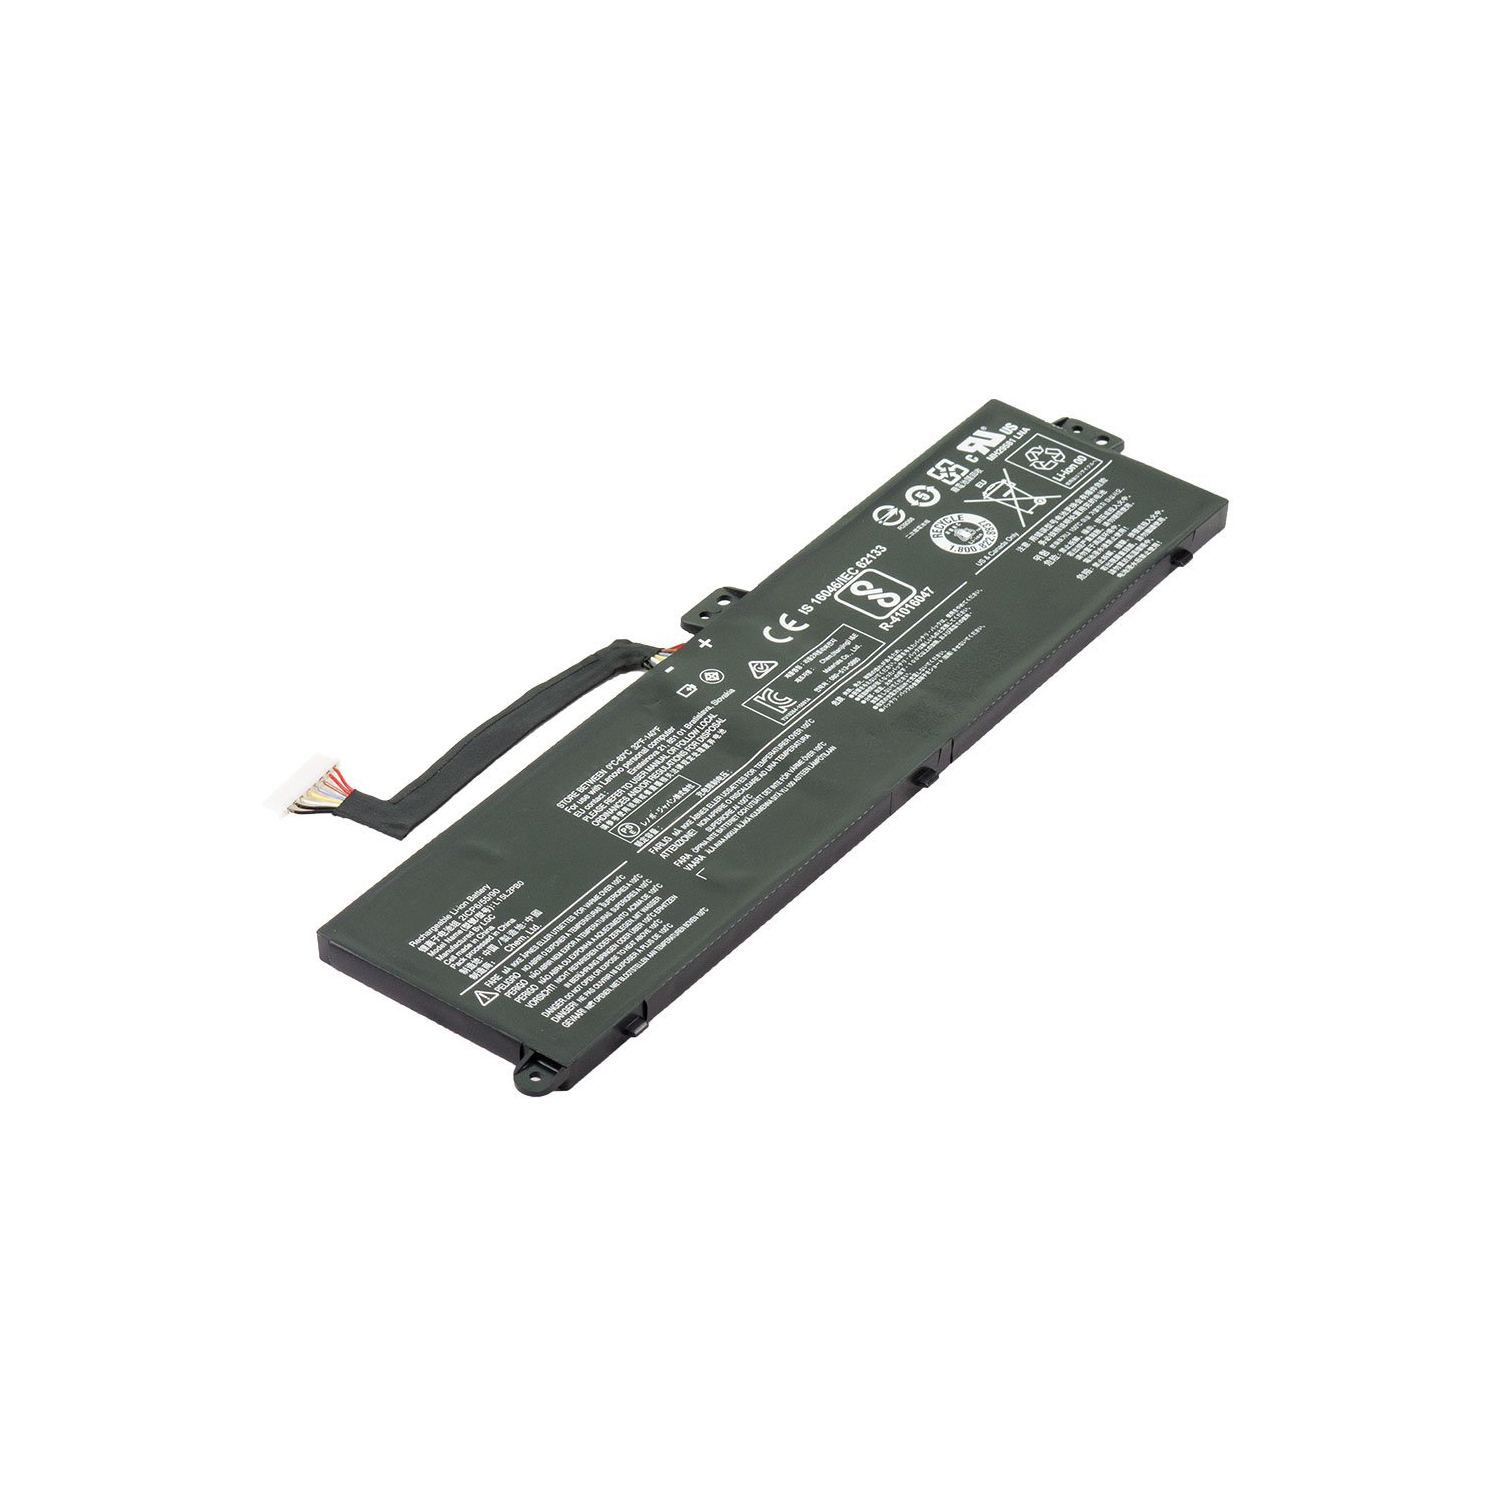 Laptop Battery Replacement for Lenovo 100S Chromebook-11IBY 80QN0007CF, 5B10J46559, 5B10J46560, 5B10J46561, L15L2PB0, L15M2PB0